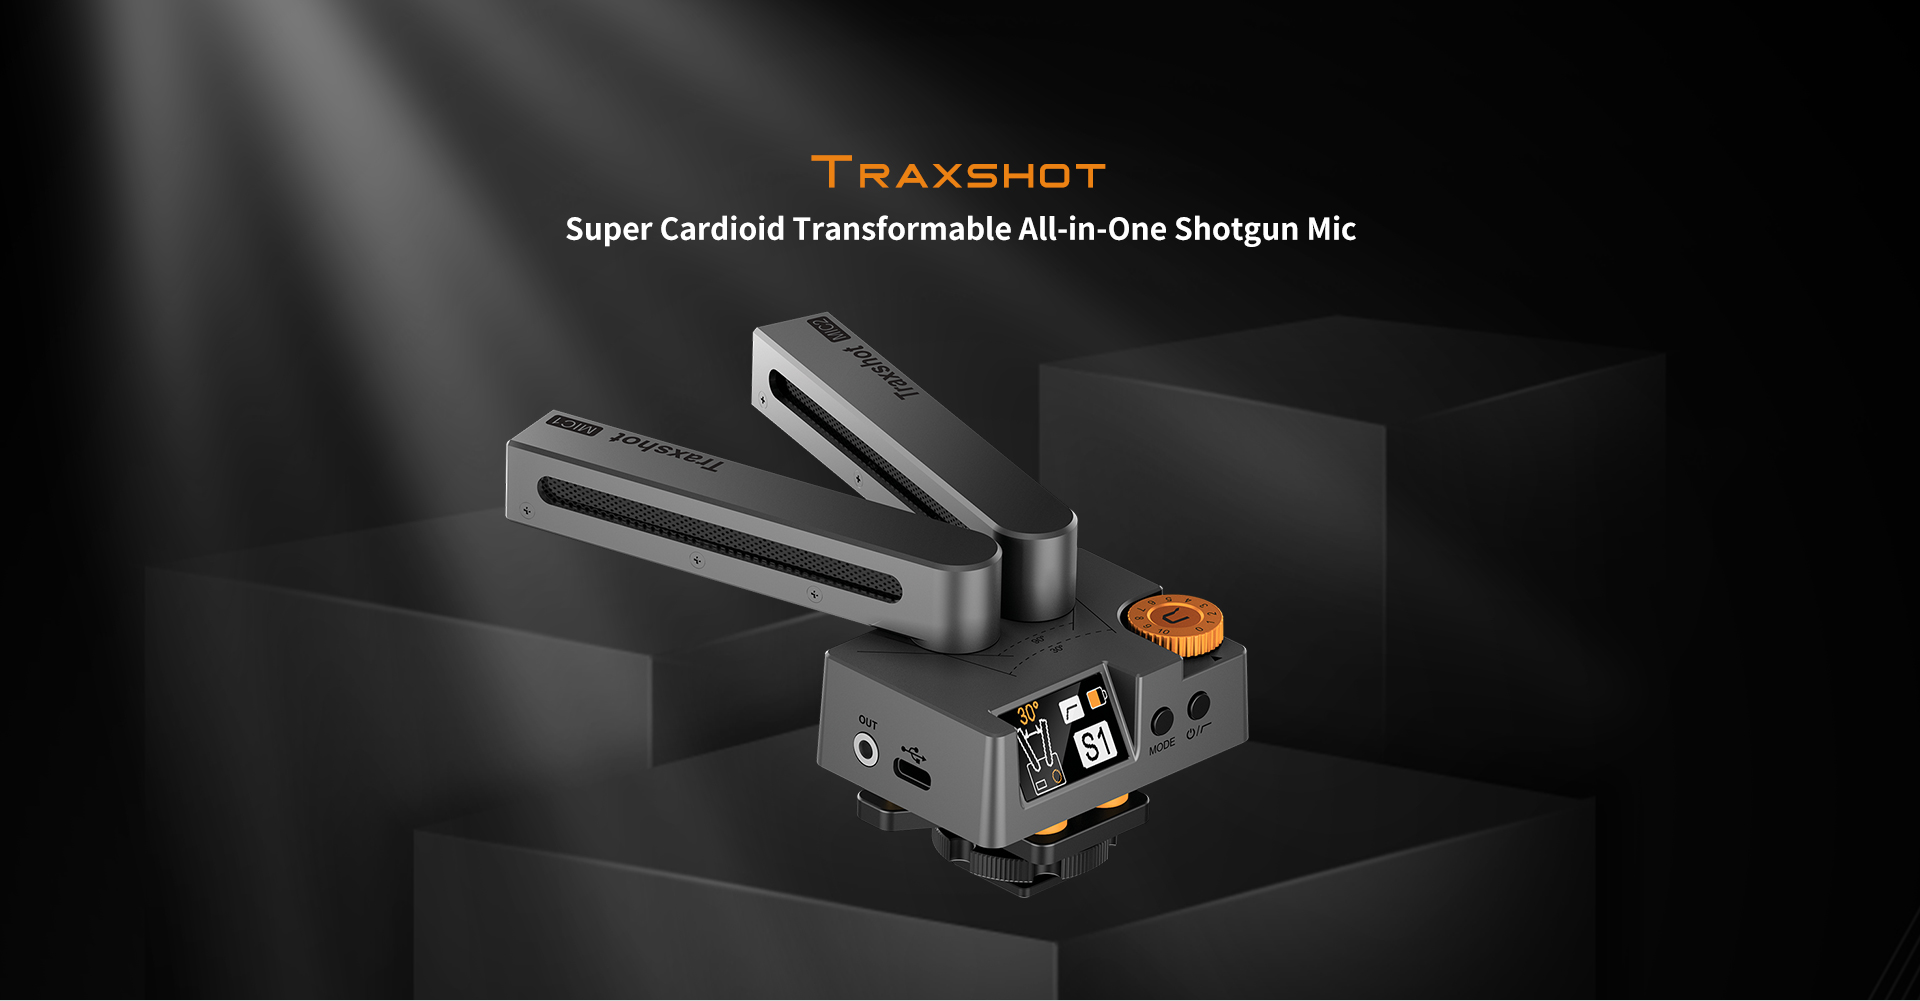 Traxshot Super Cardioid Transformable All-in-One Mono/St